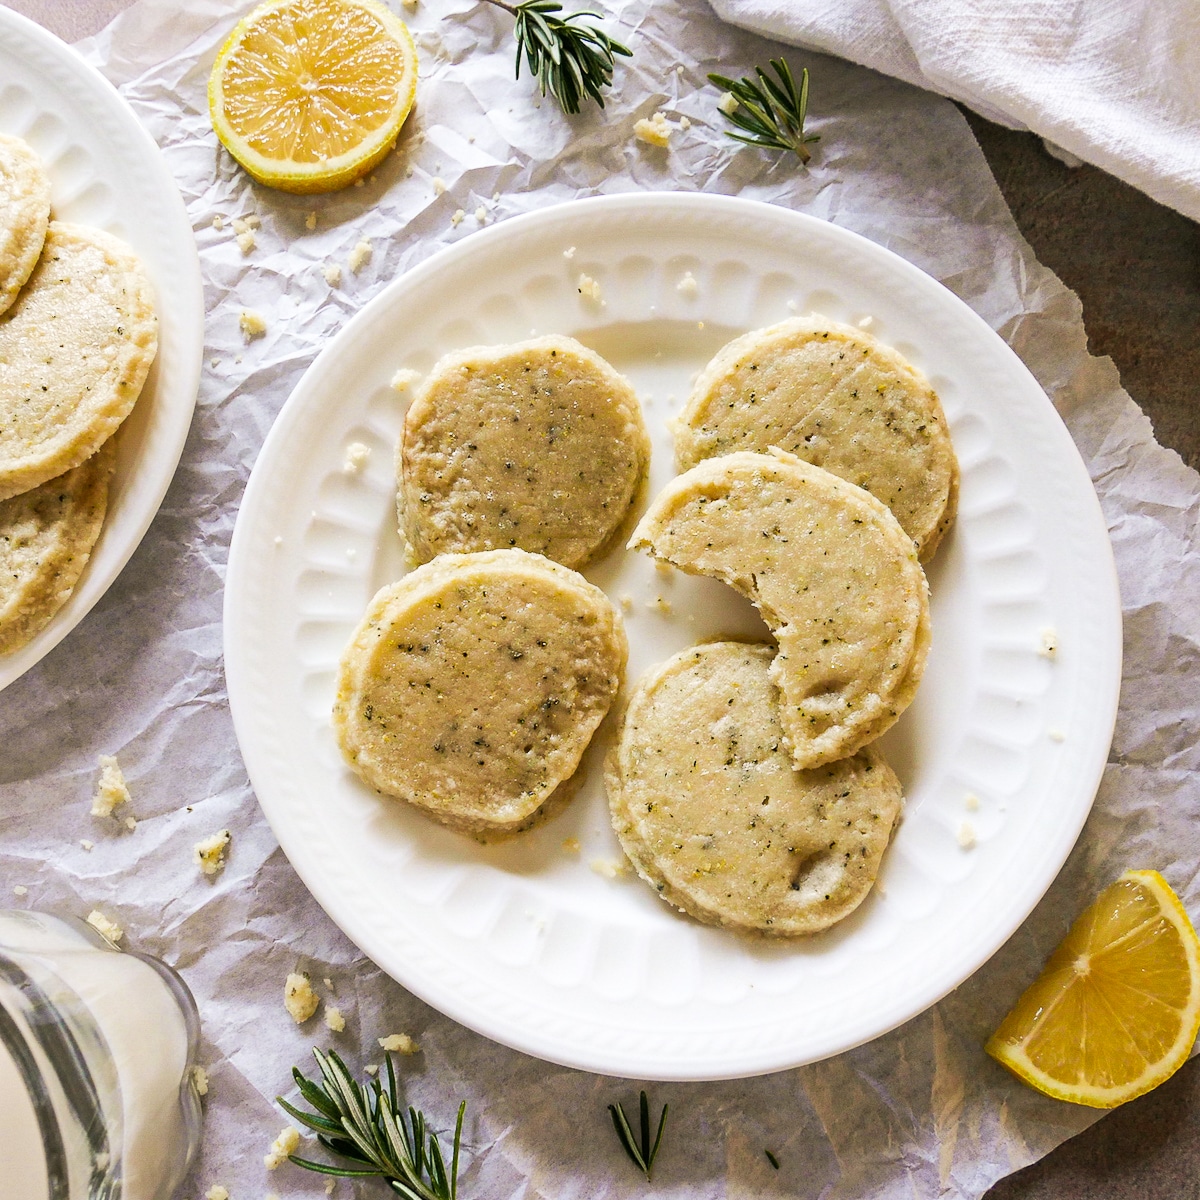 shortbread cookies on a plate with rosemary sprigs and sliced lemon.